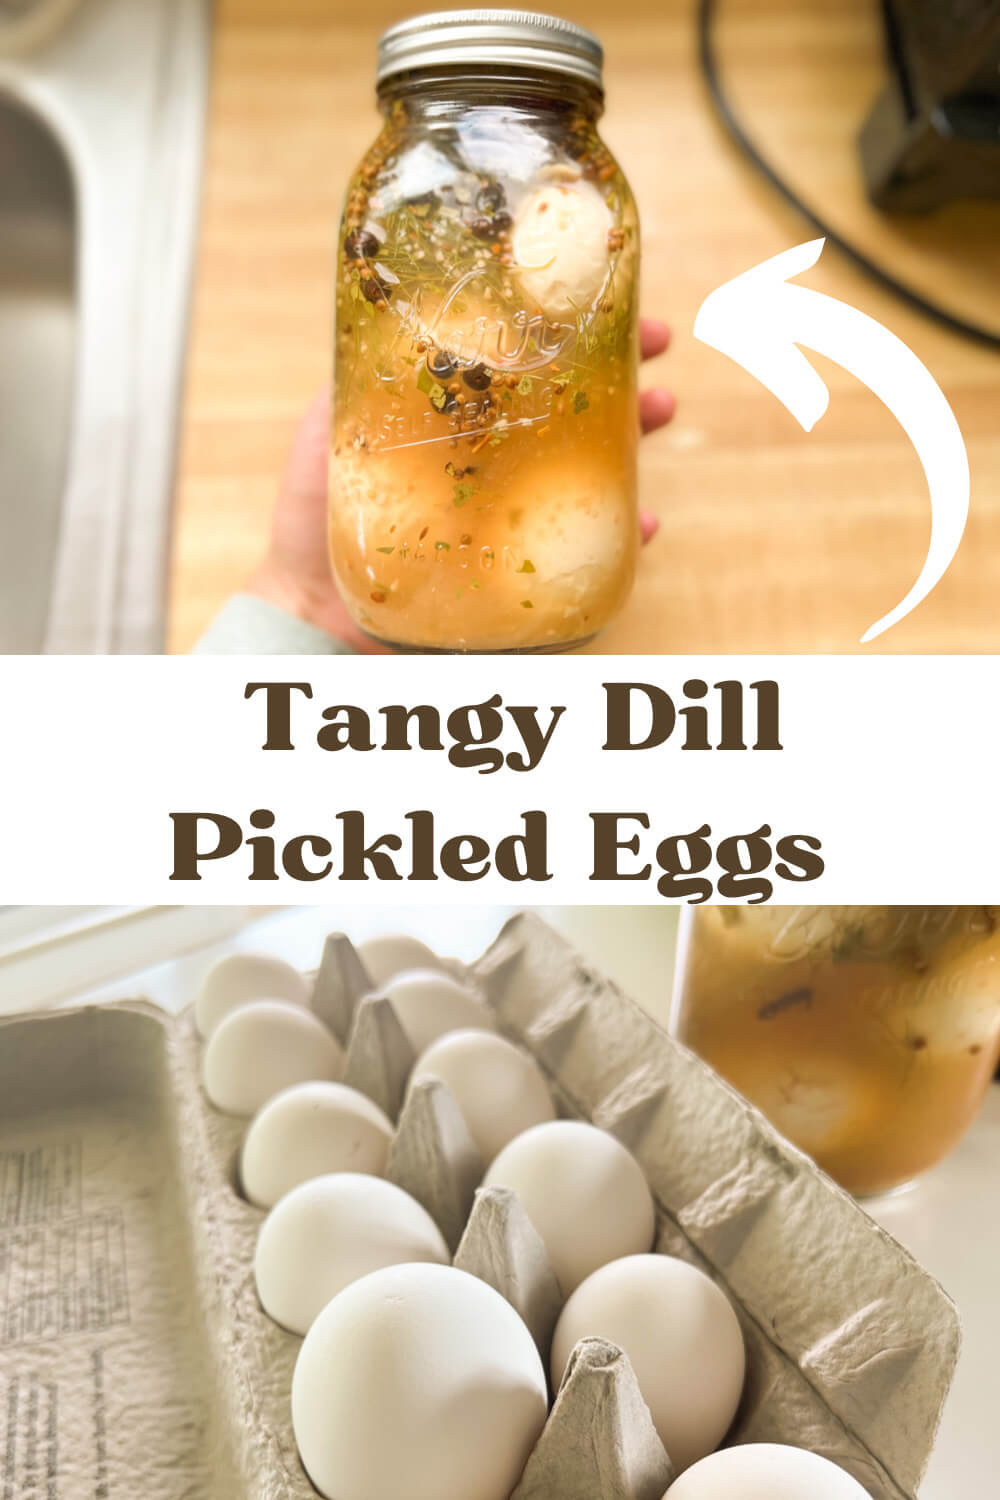 Tangy Dill Pickled Eggs